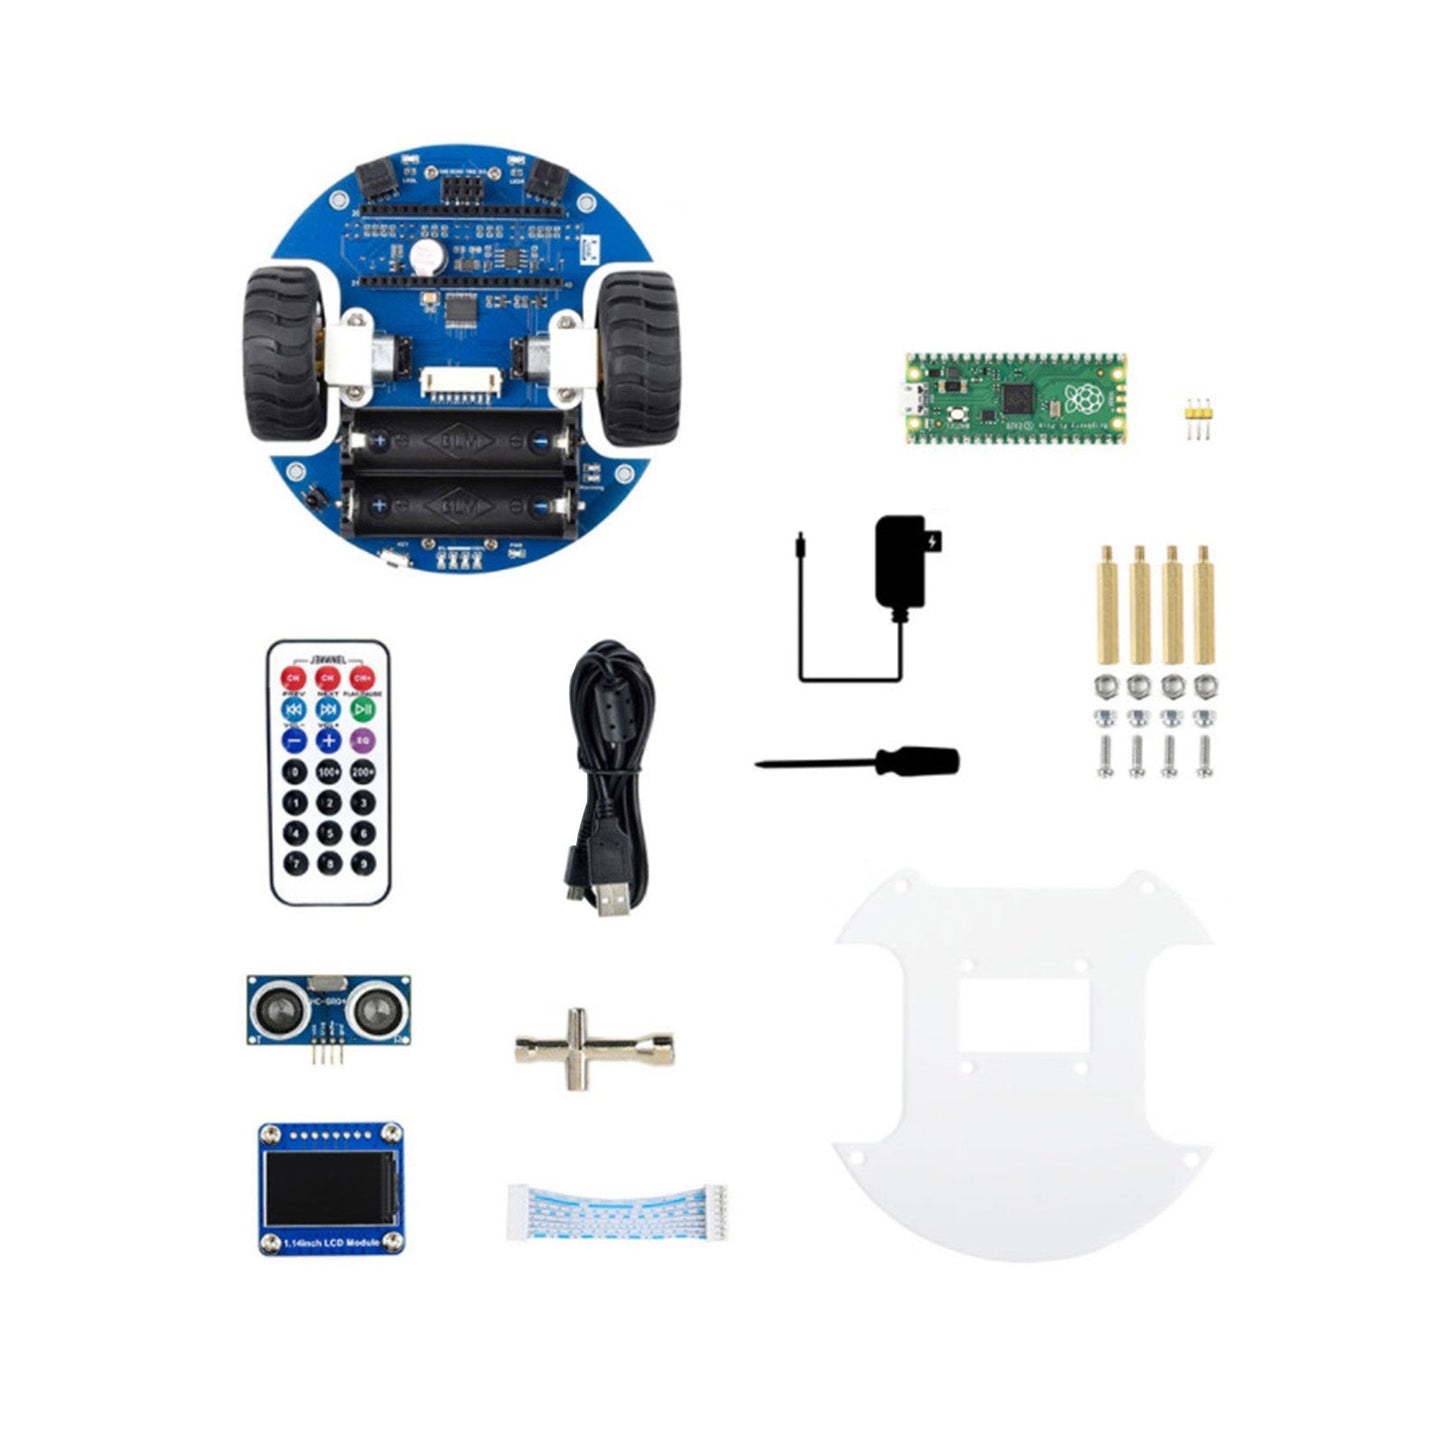 Self-Driving Smart Car Bluetooth Control Infrared With Raspberry Pico GO Board